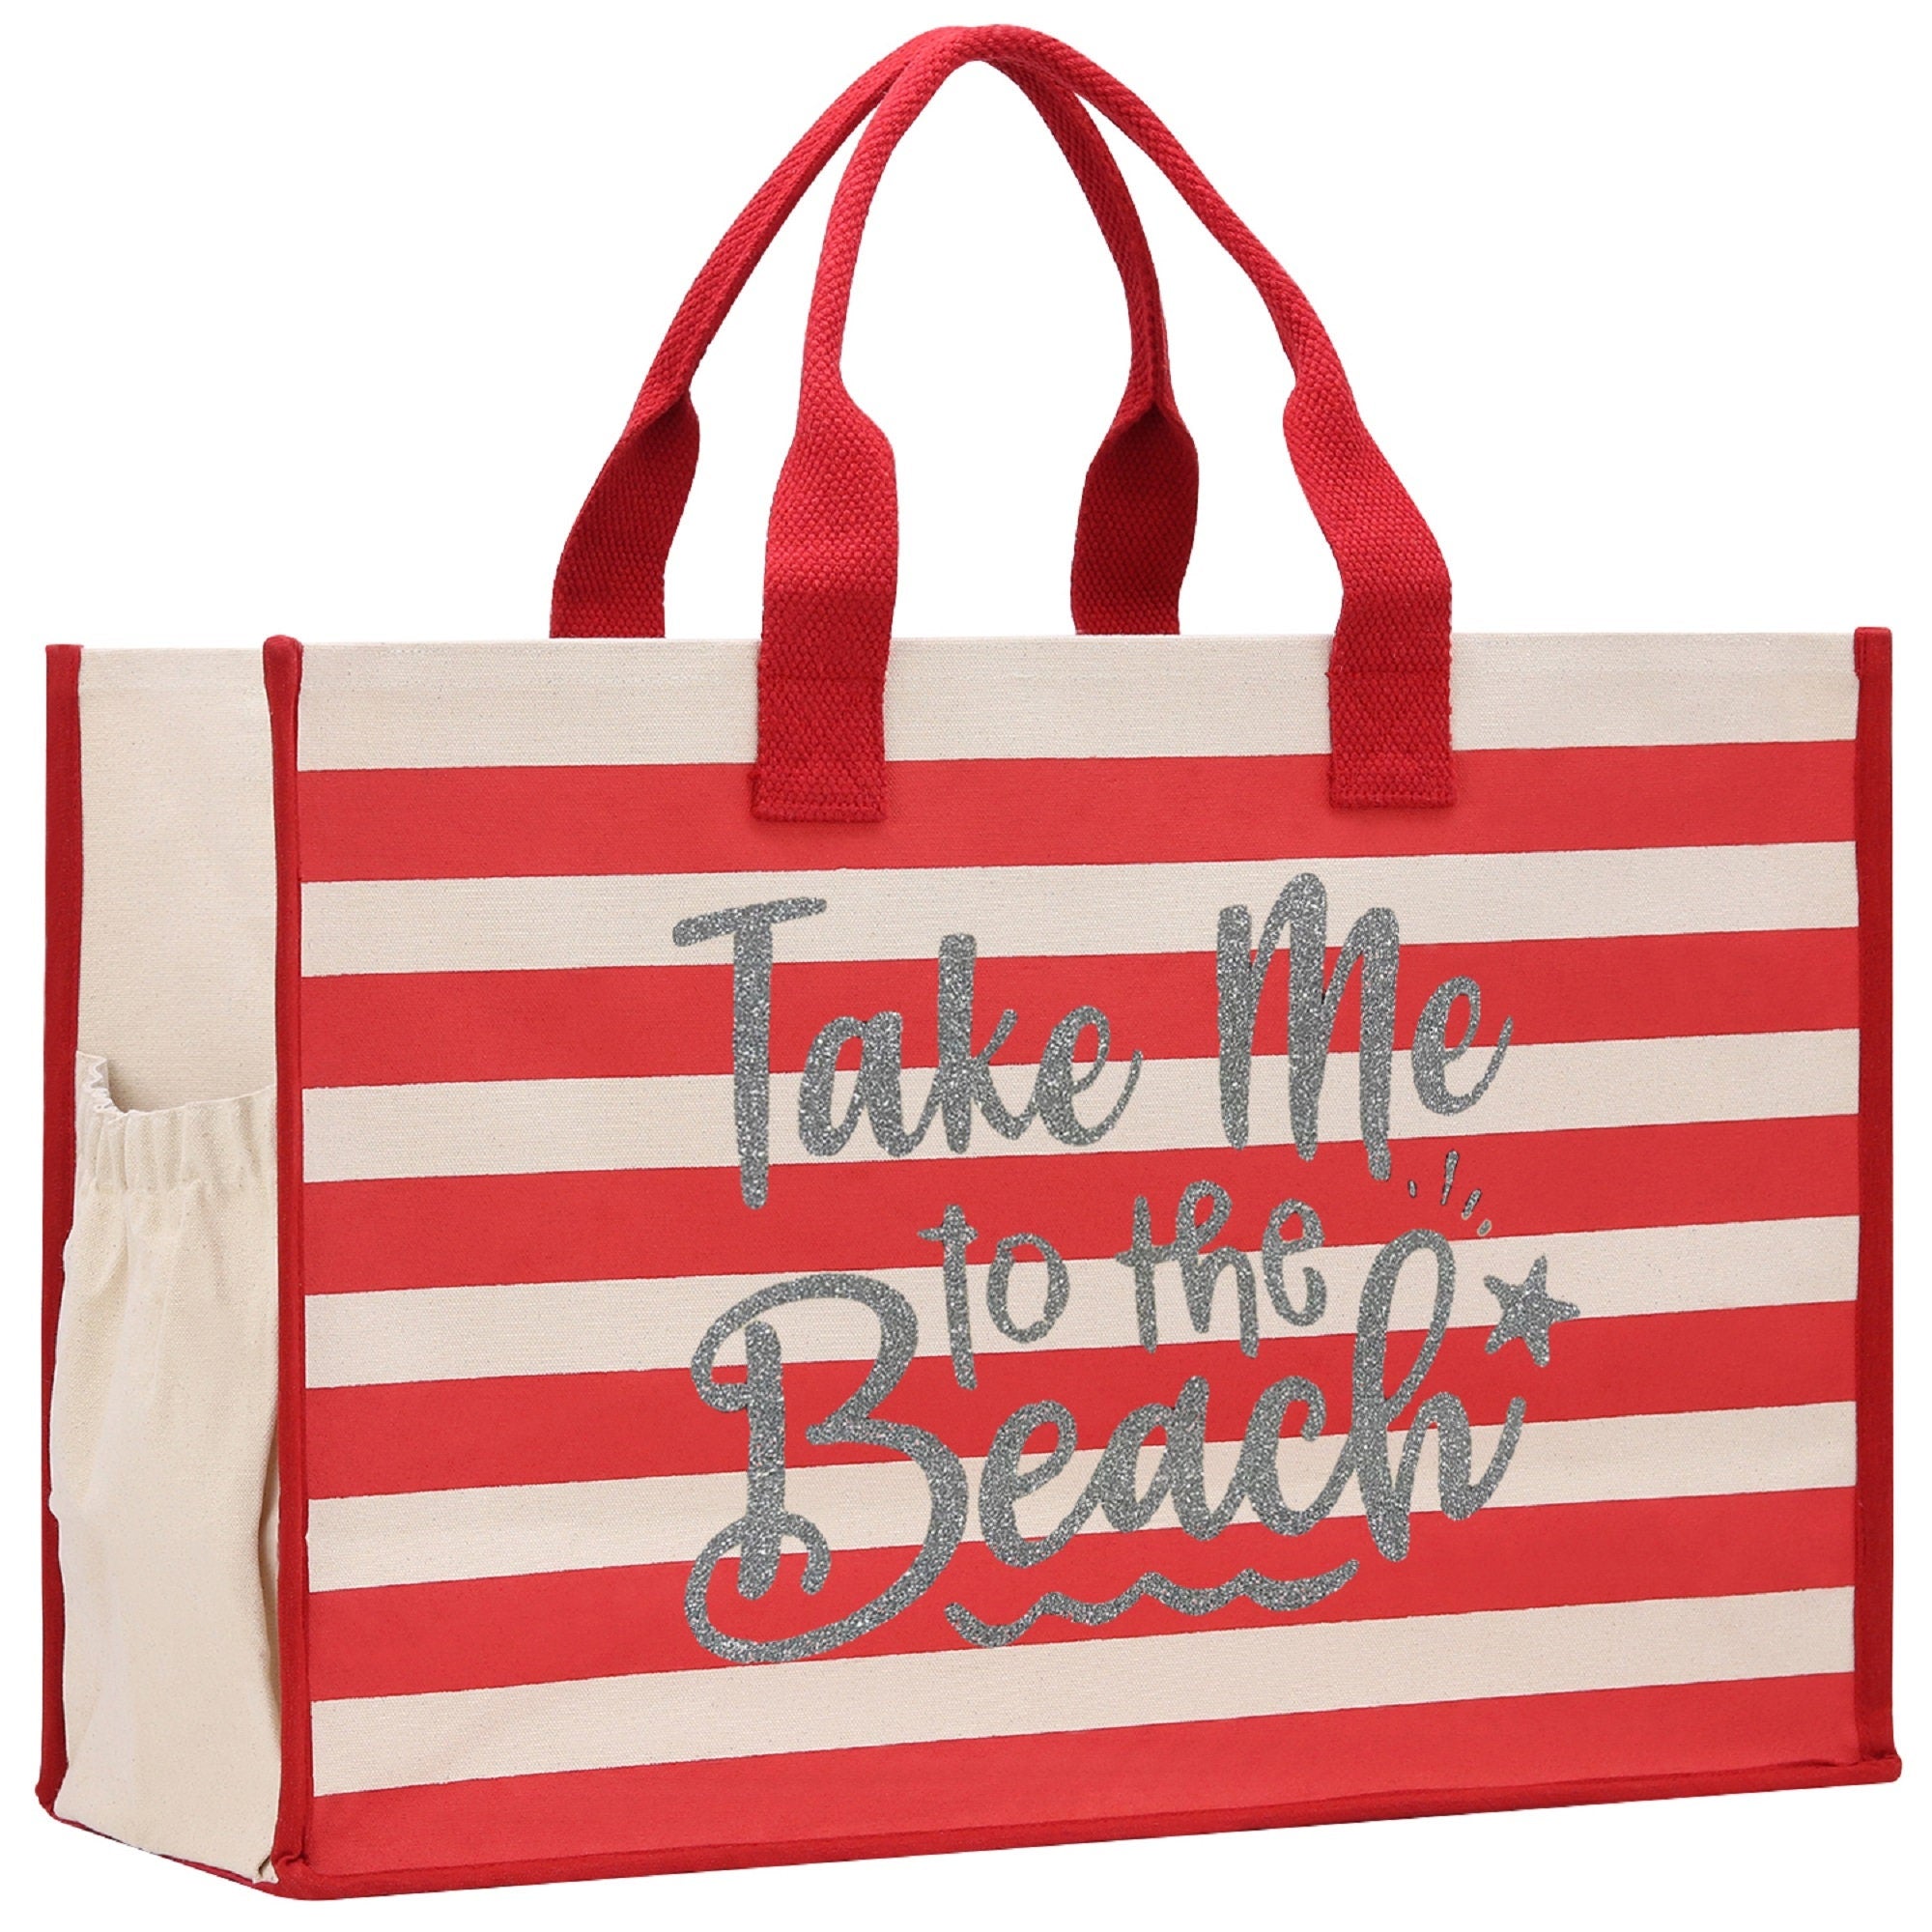 Take Me To The Beach Cabana Tote Bag XL - Oversized Chic Tote Bag with Zipper and Inner Pocket - Beach Bag for Women - Weekender Beach Tote